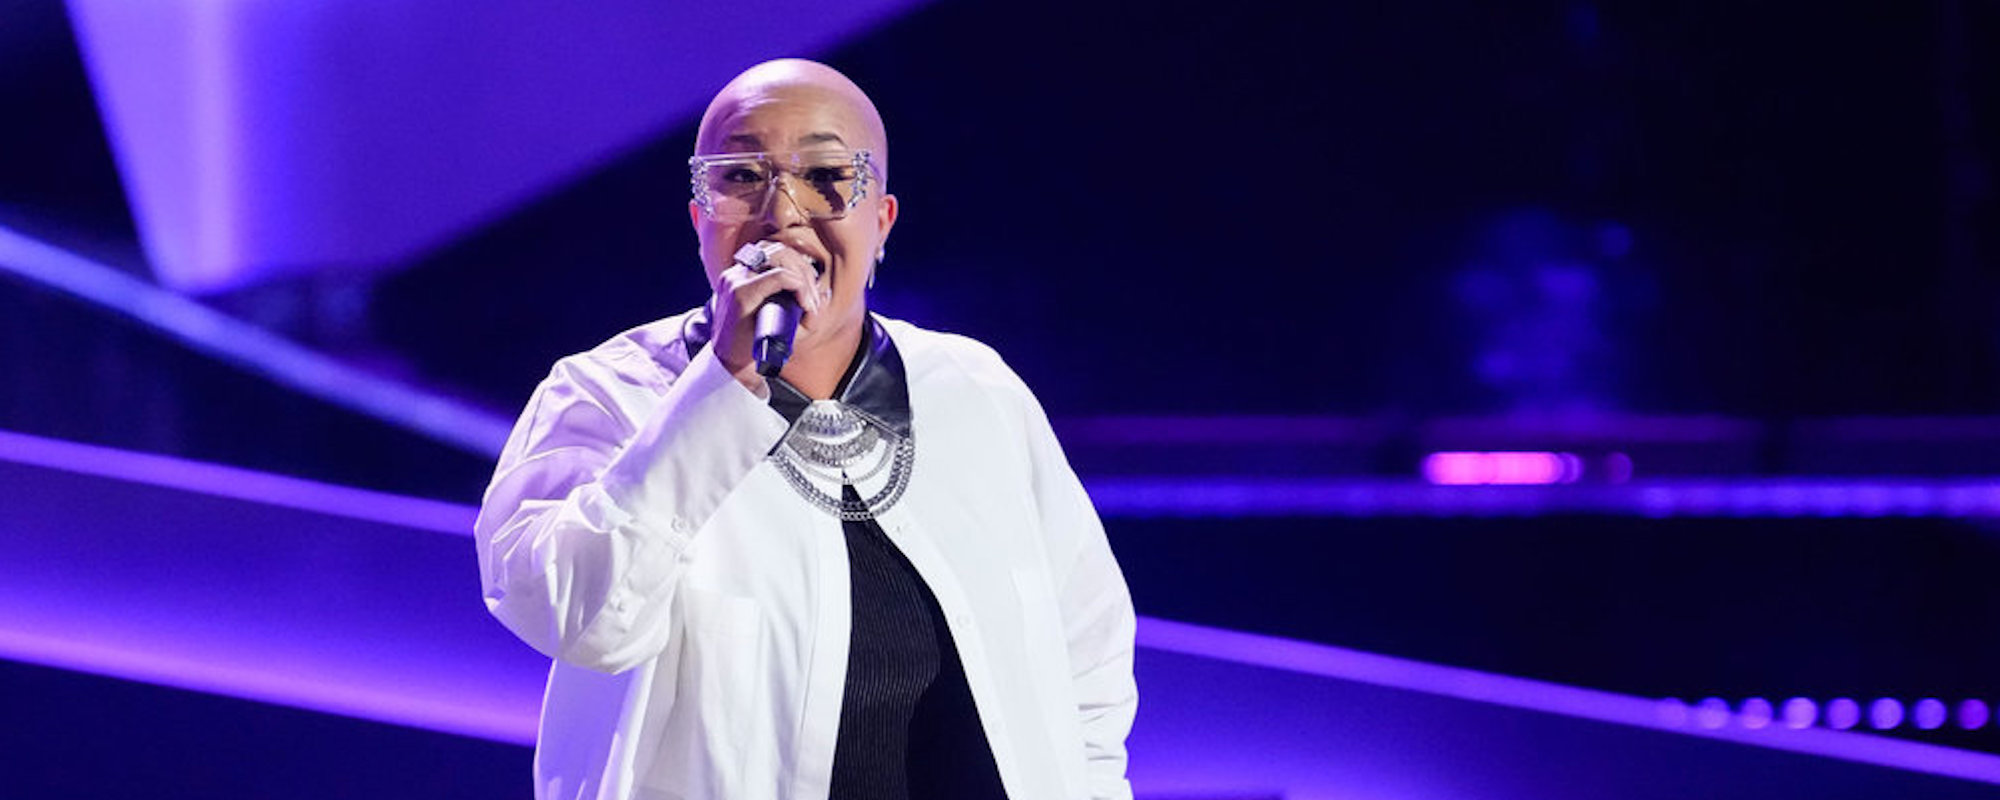 Bobby Womack’s Niece JaRae Gets Four-Chair Turn on ‘The Voice’ with Amy Winehouse Cover